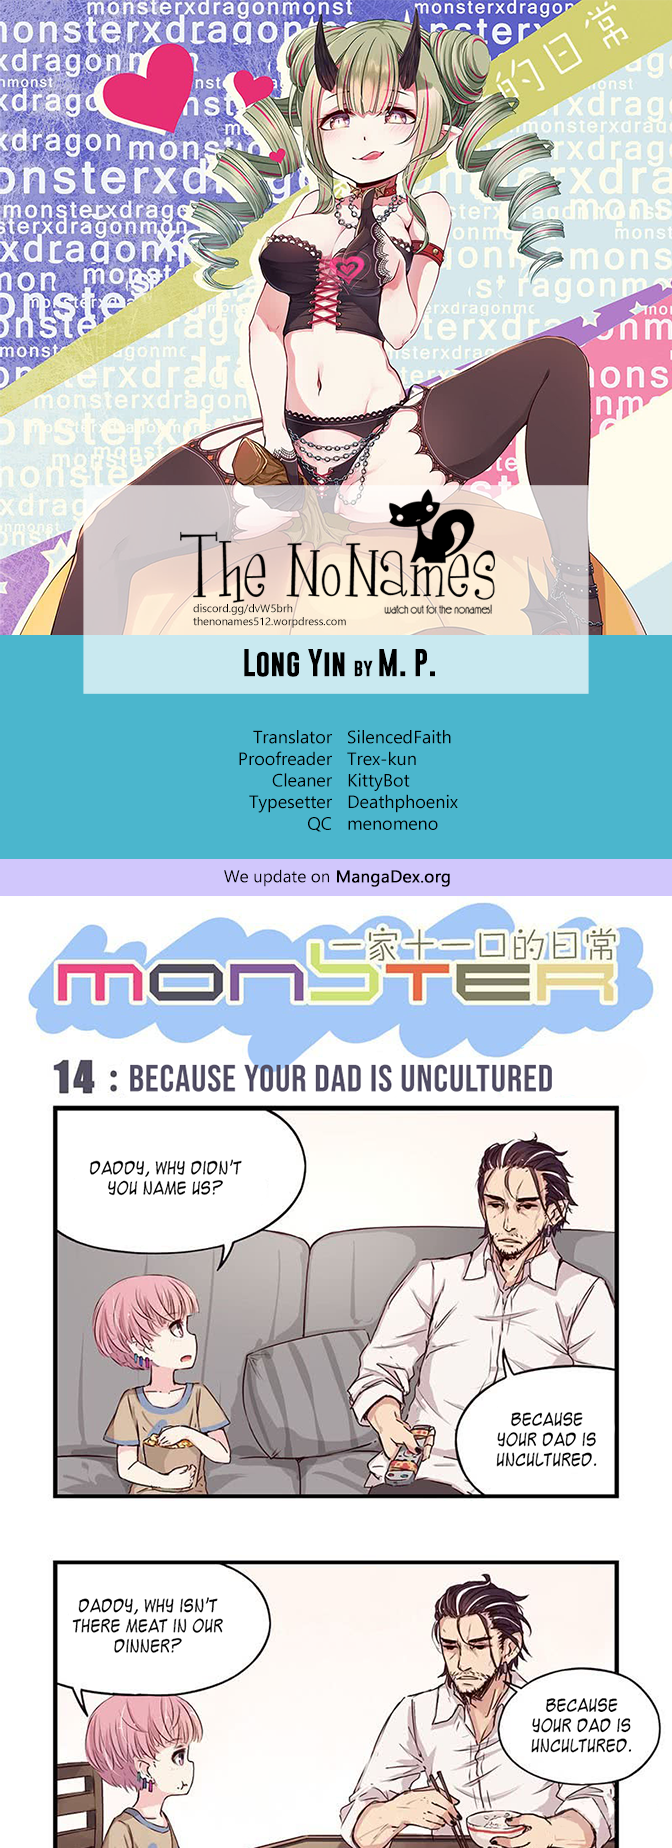 Long Yin - Monster Chapter 14: Because Your Dad is Uncultured